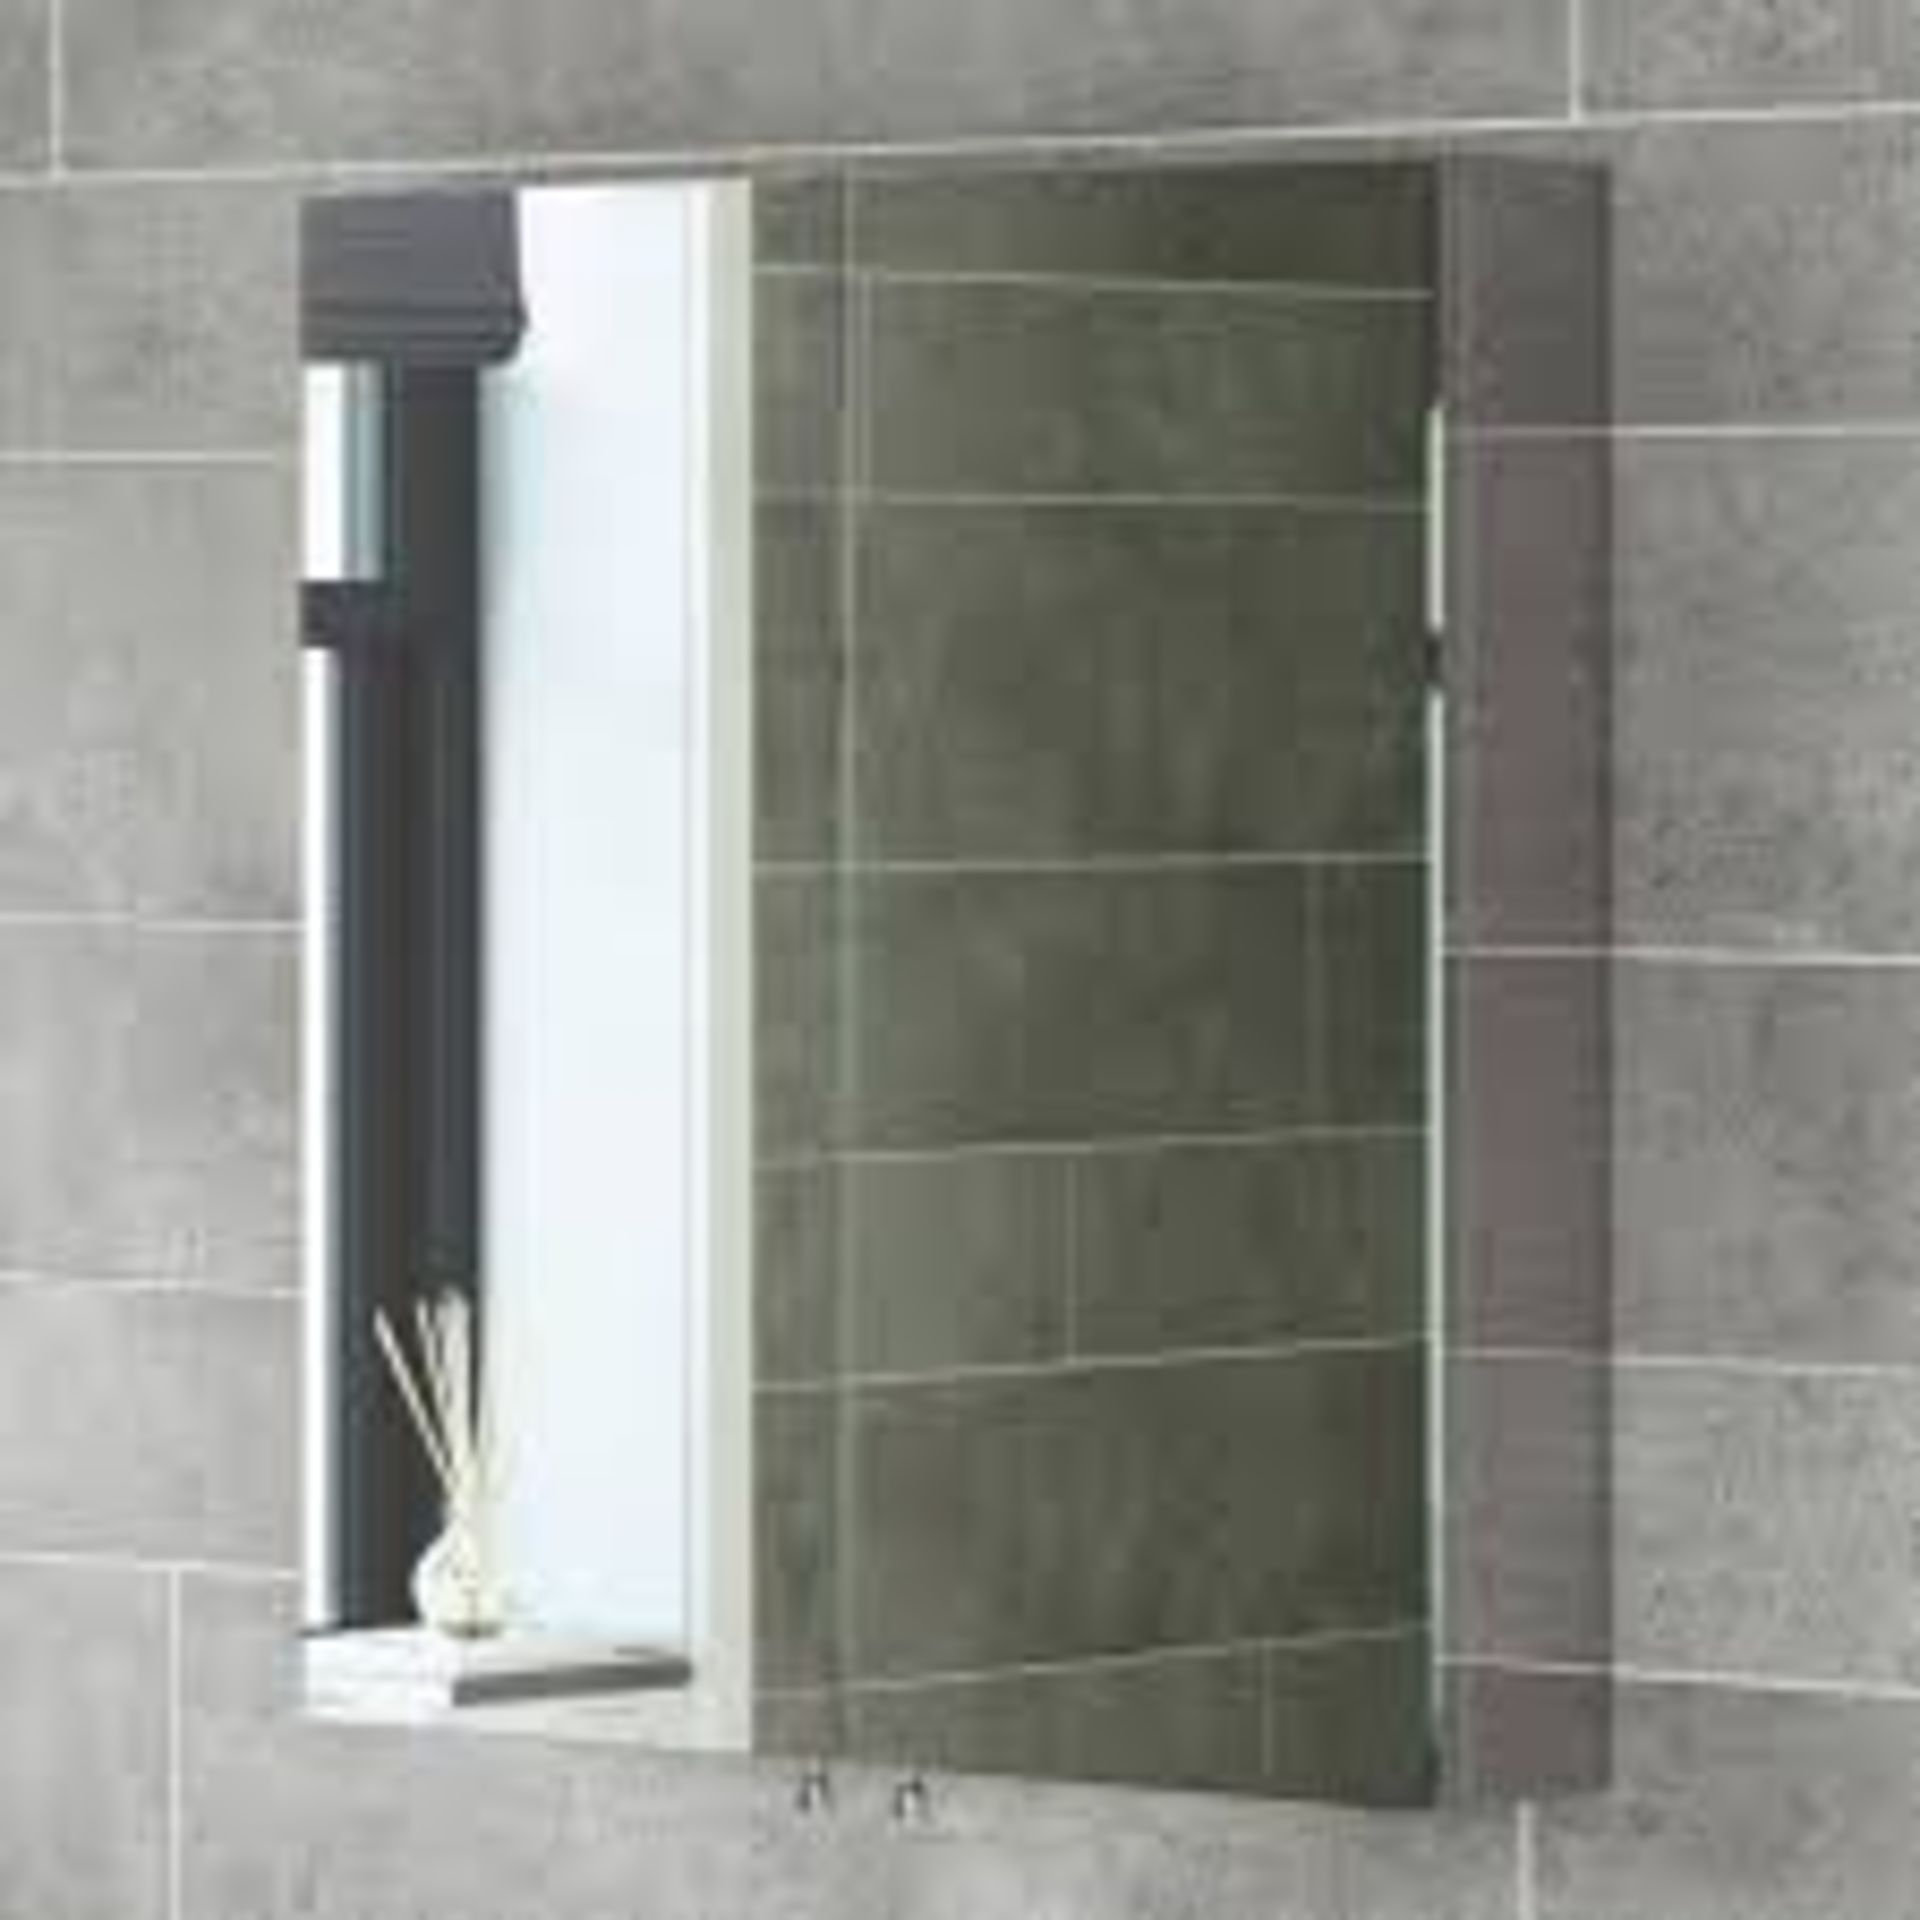 (J123) 670x600mm Liberty Stainless Steel Double Door Mirror Cabinet. RRP £262.99. Made from high-